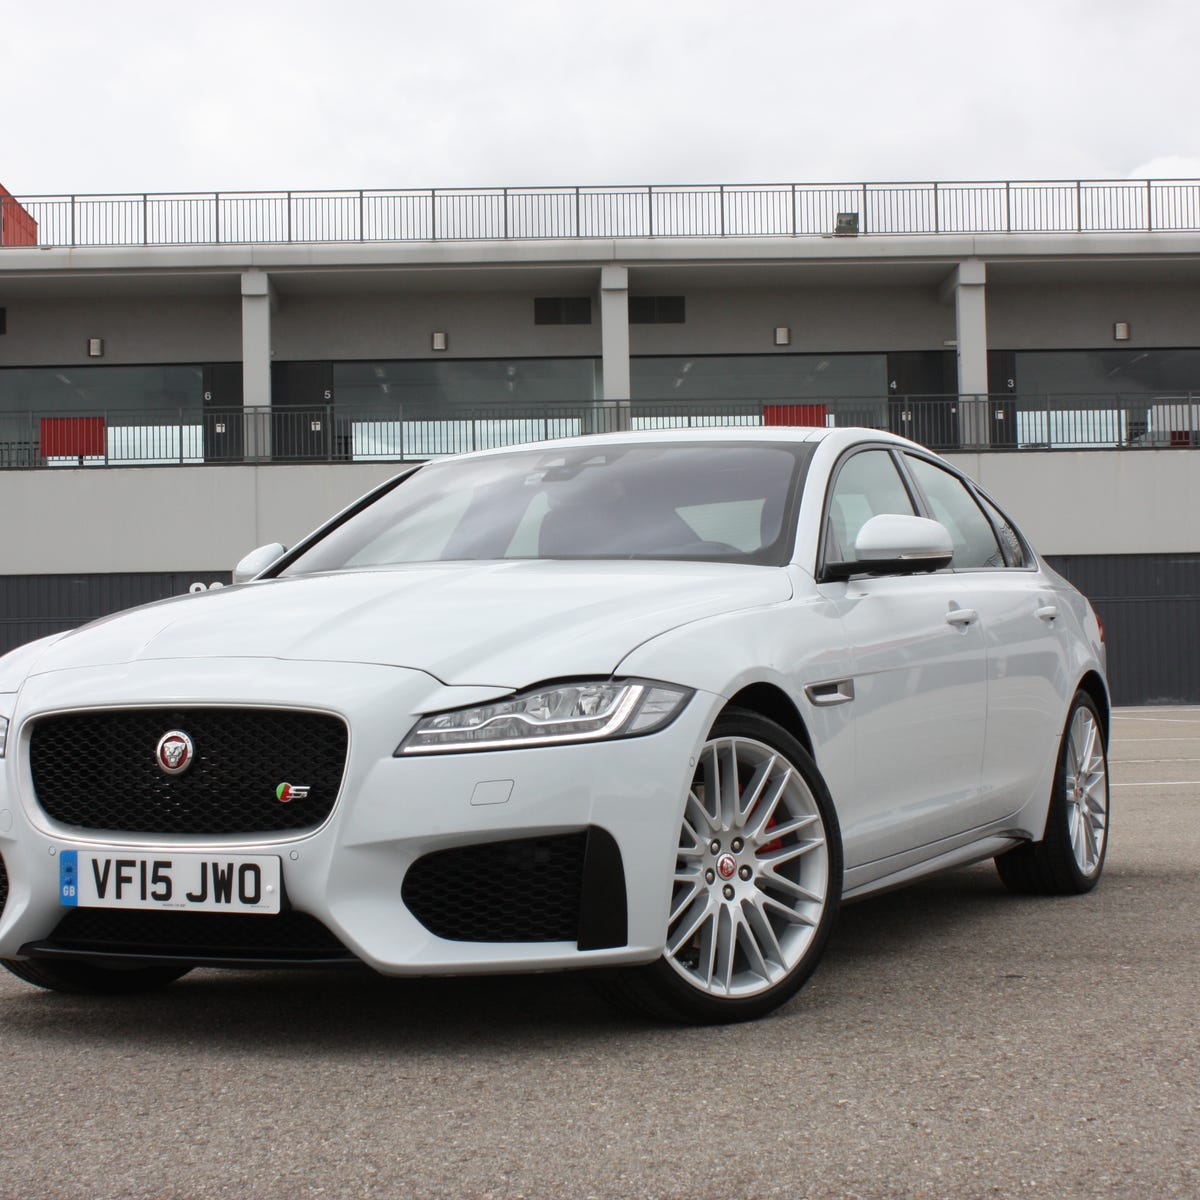 2016 Jaguar XF review: 2016 Jaguar XF is leaner, quicker, techier and  better priced - CNET